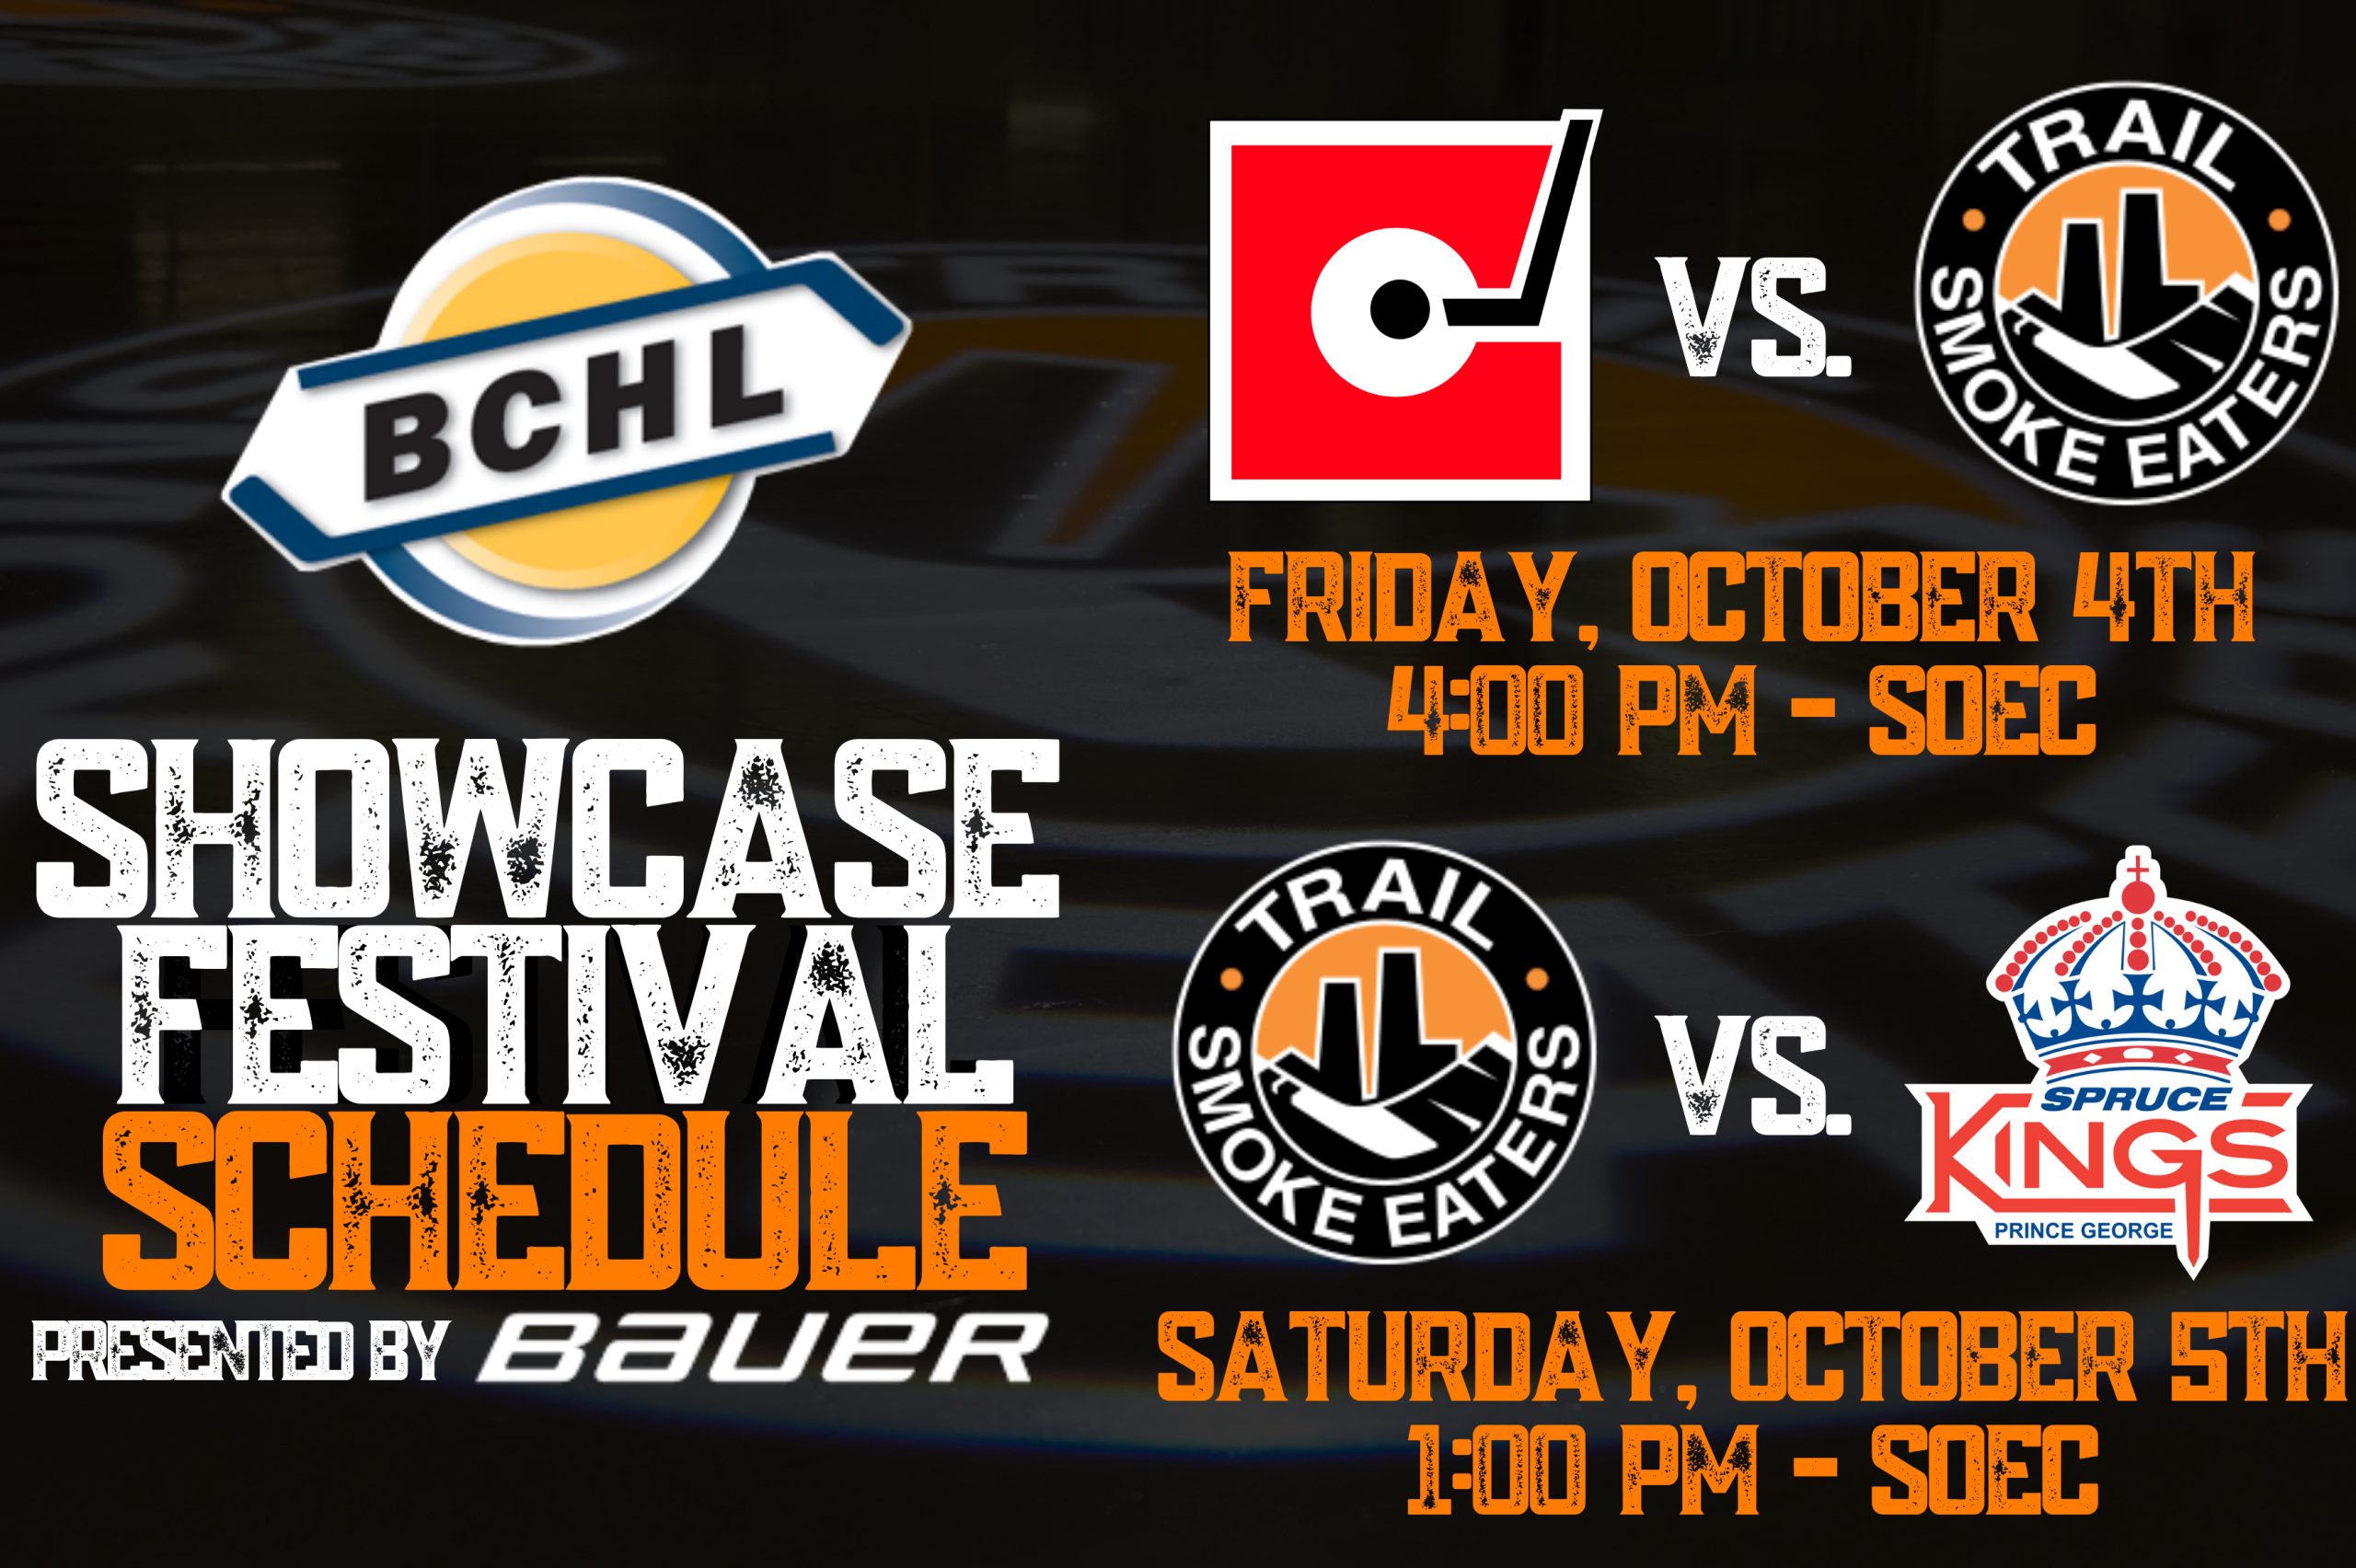 Smoke Eaters & BCHL Release Details And Schedule For 2019 Showcase Festival Presented By Bauer